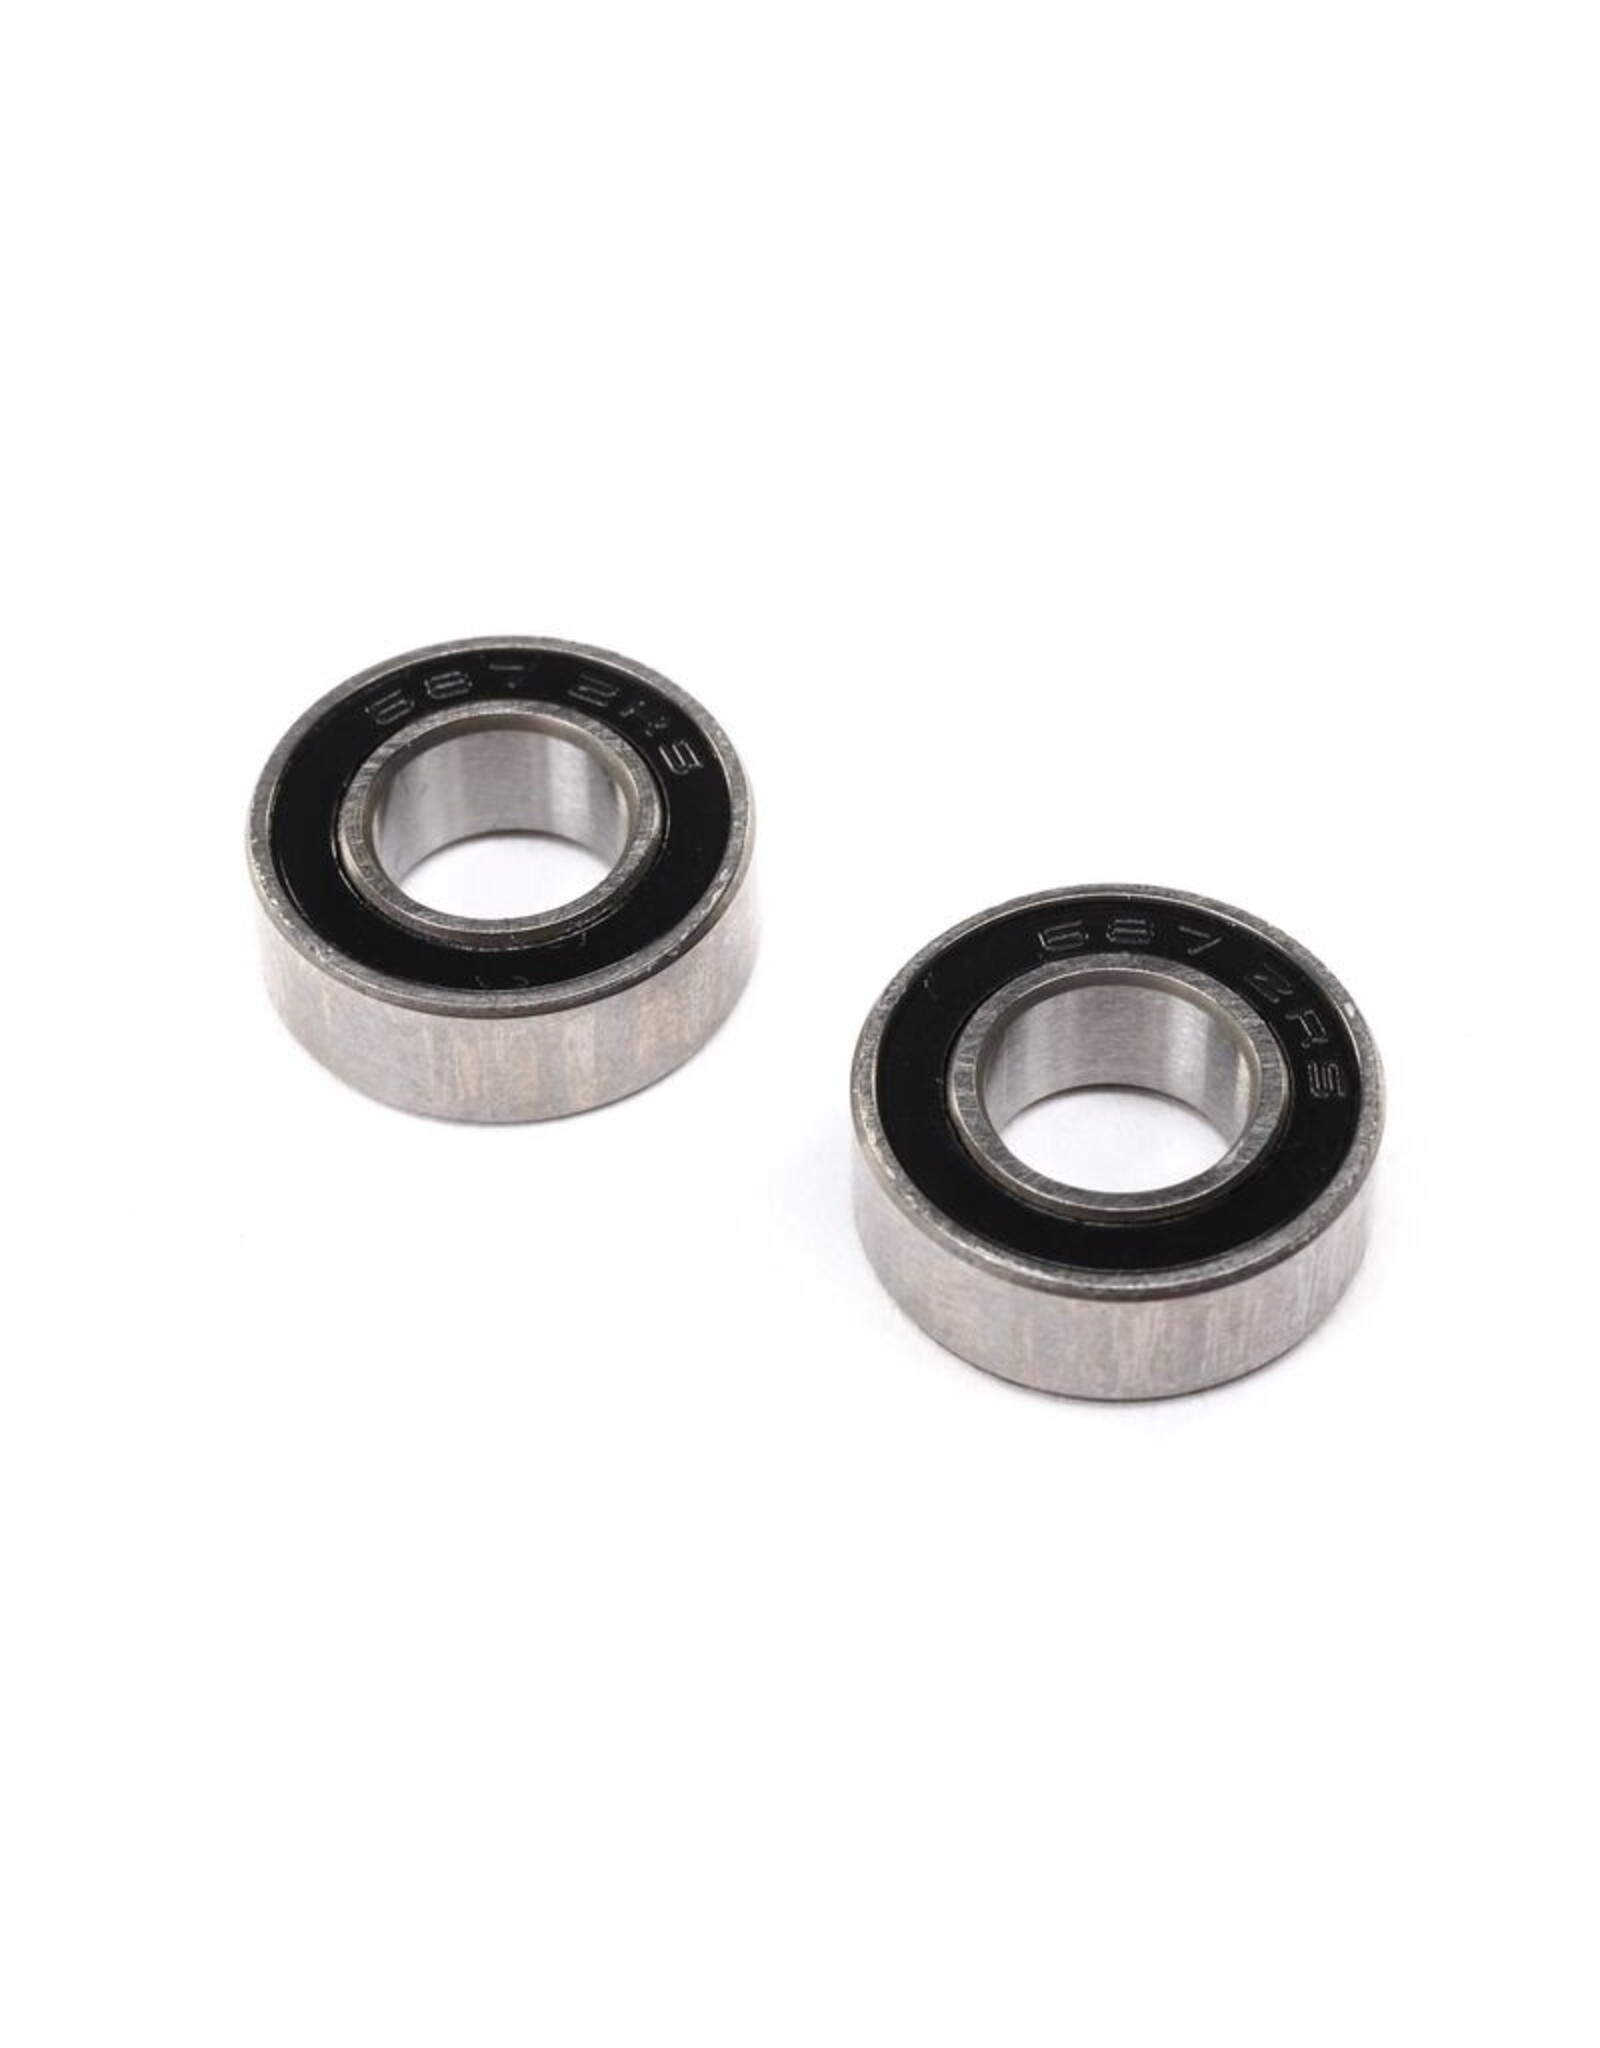 Losi LOS267002 7 x 14 x 5mm Ball Bearing, Rubber Sealed (2)